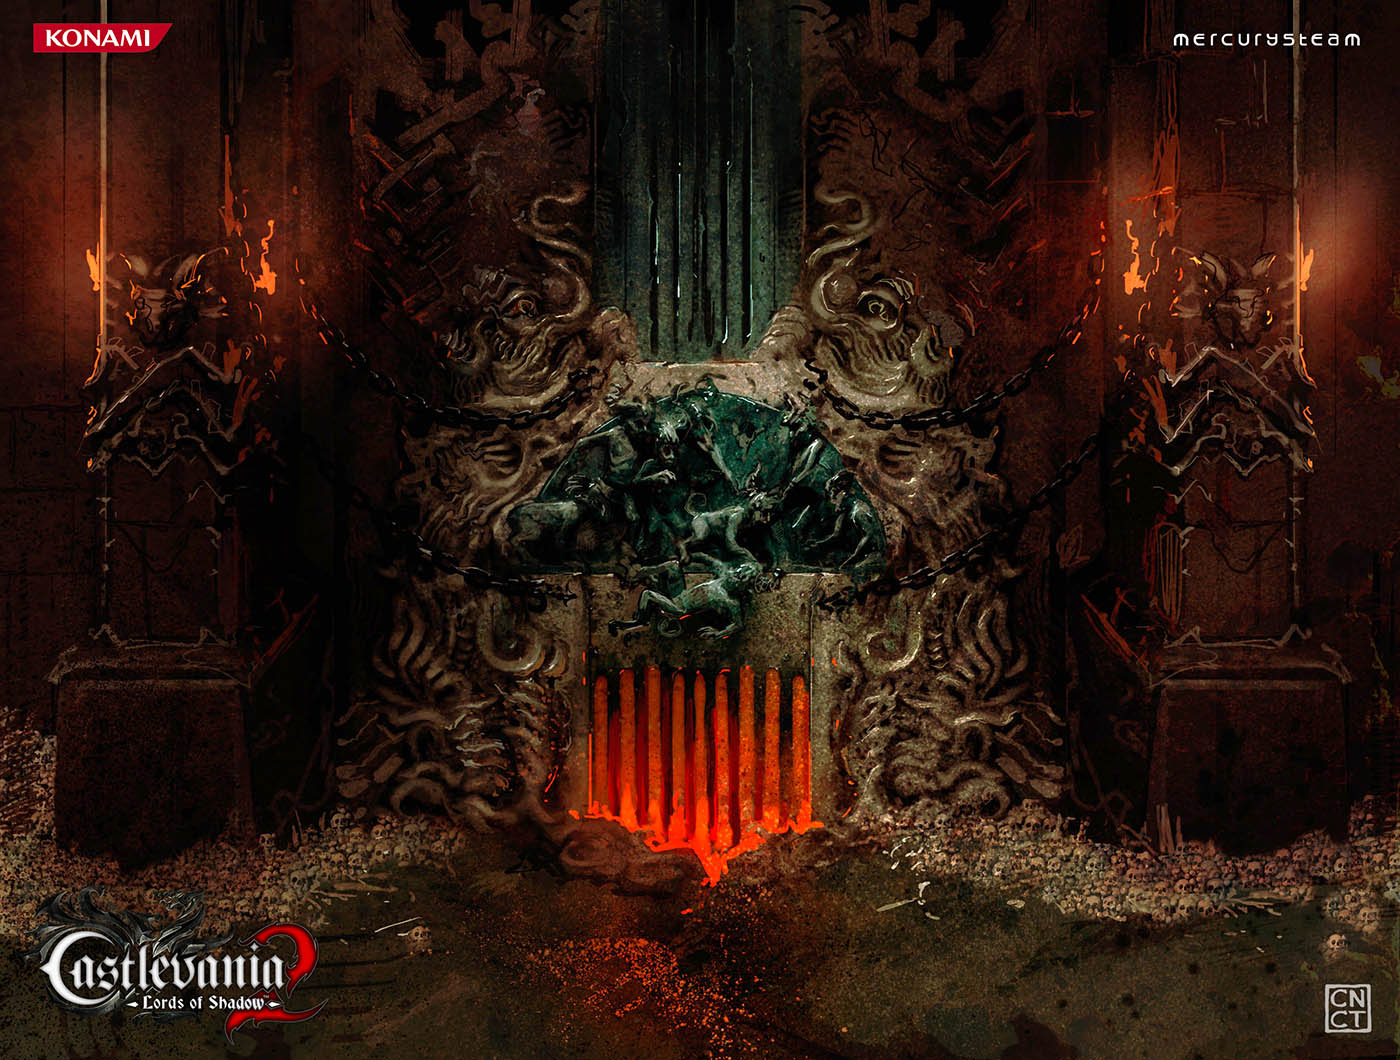 Castlevania: Lords of Shadow 2 Concept Art by Carlos NCT | Concept Art